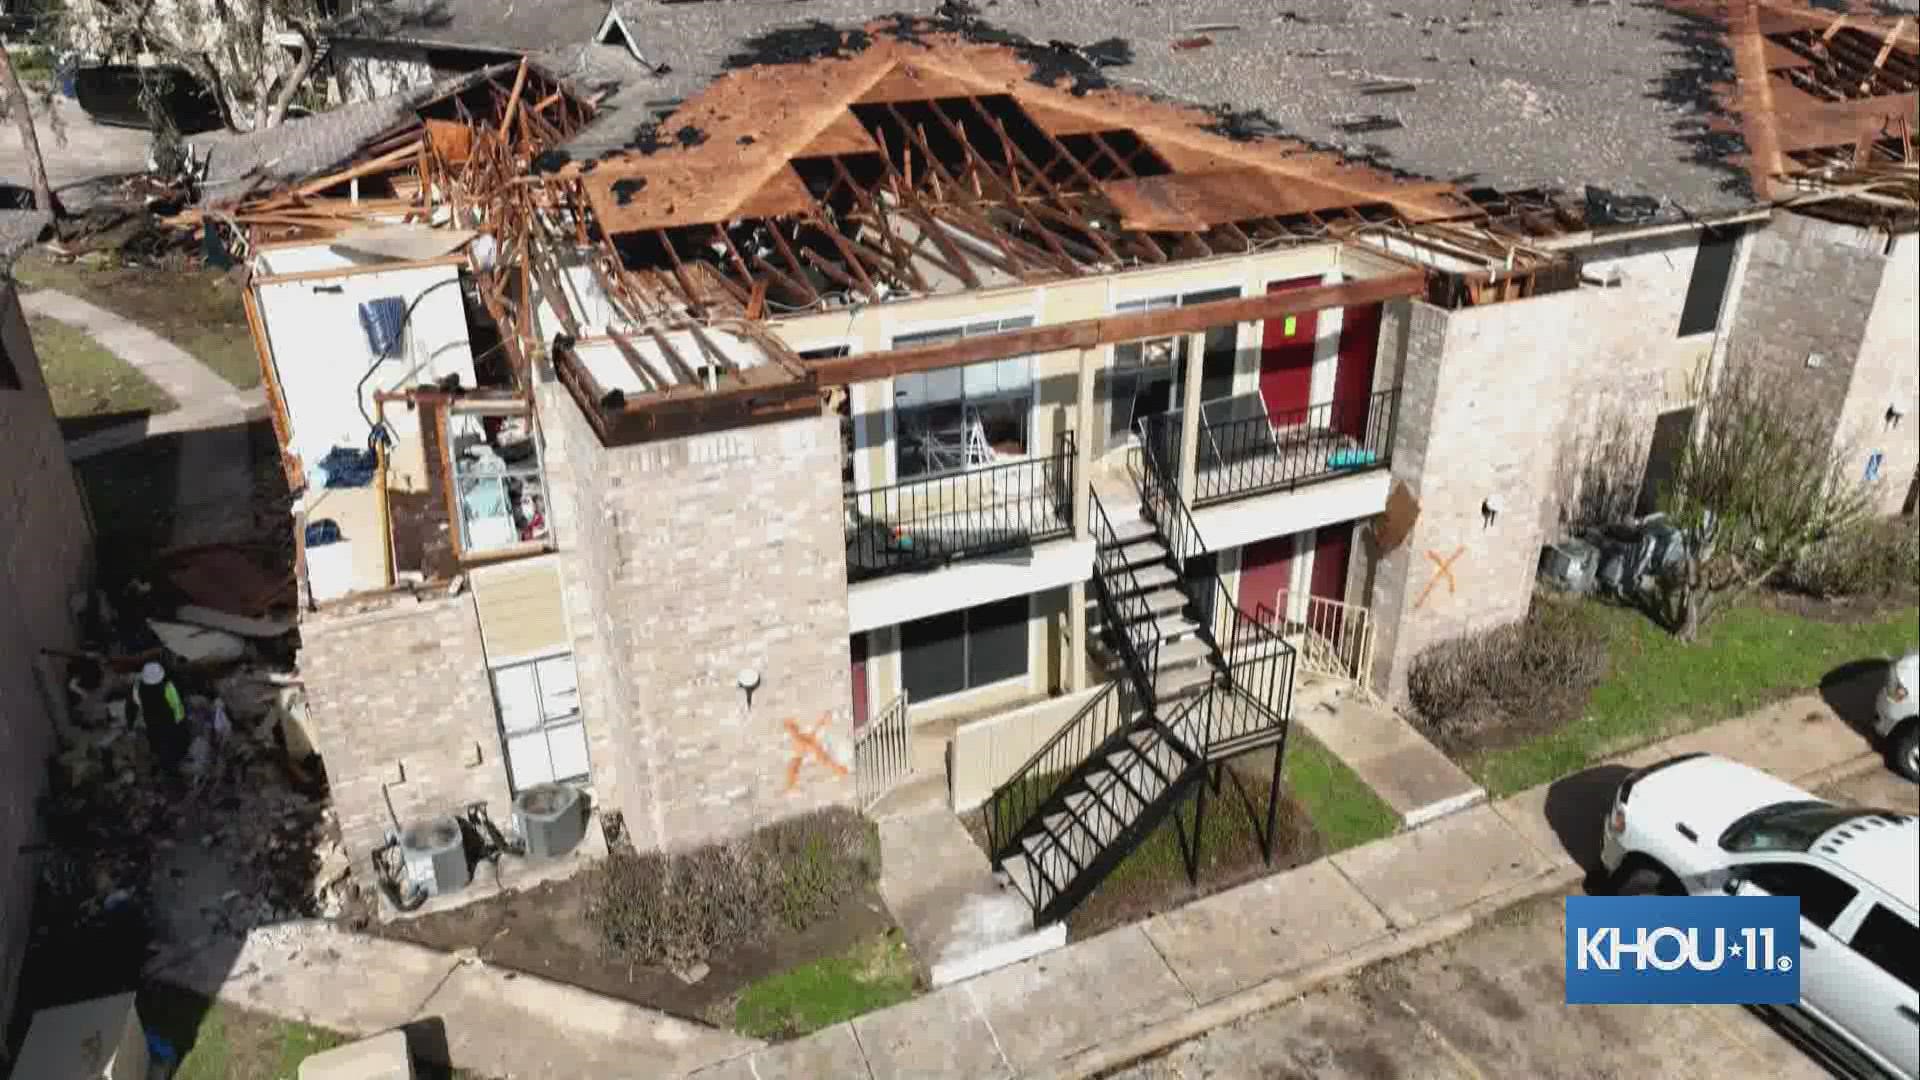 Drone video shows extensive tornado damage at the Beamer Place Apartments in southeast Houston. A tornado ripped through the area Tuesday, Jan. 24.